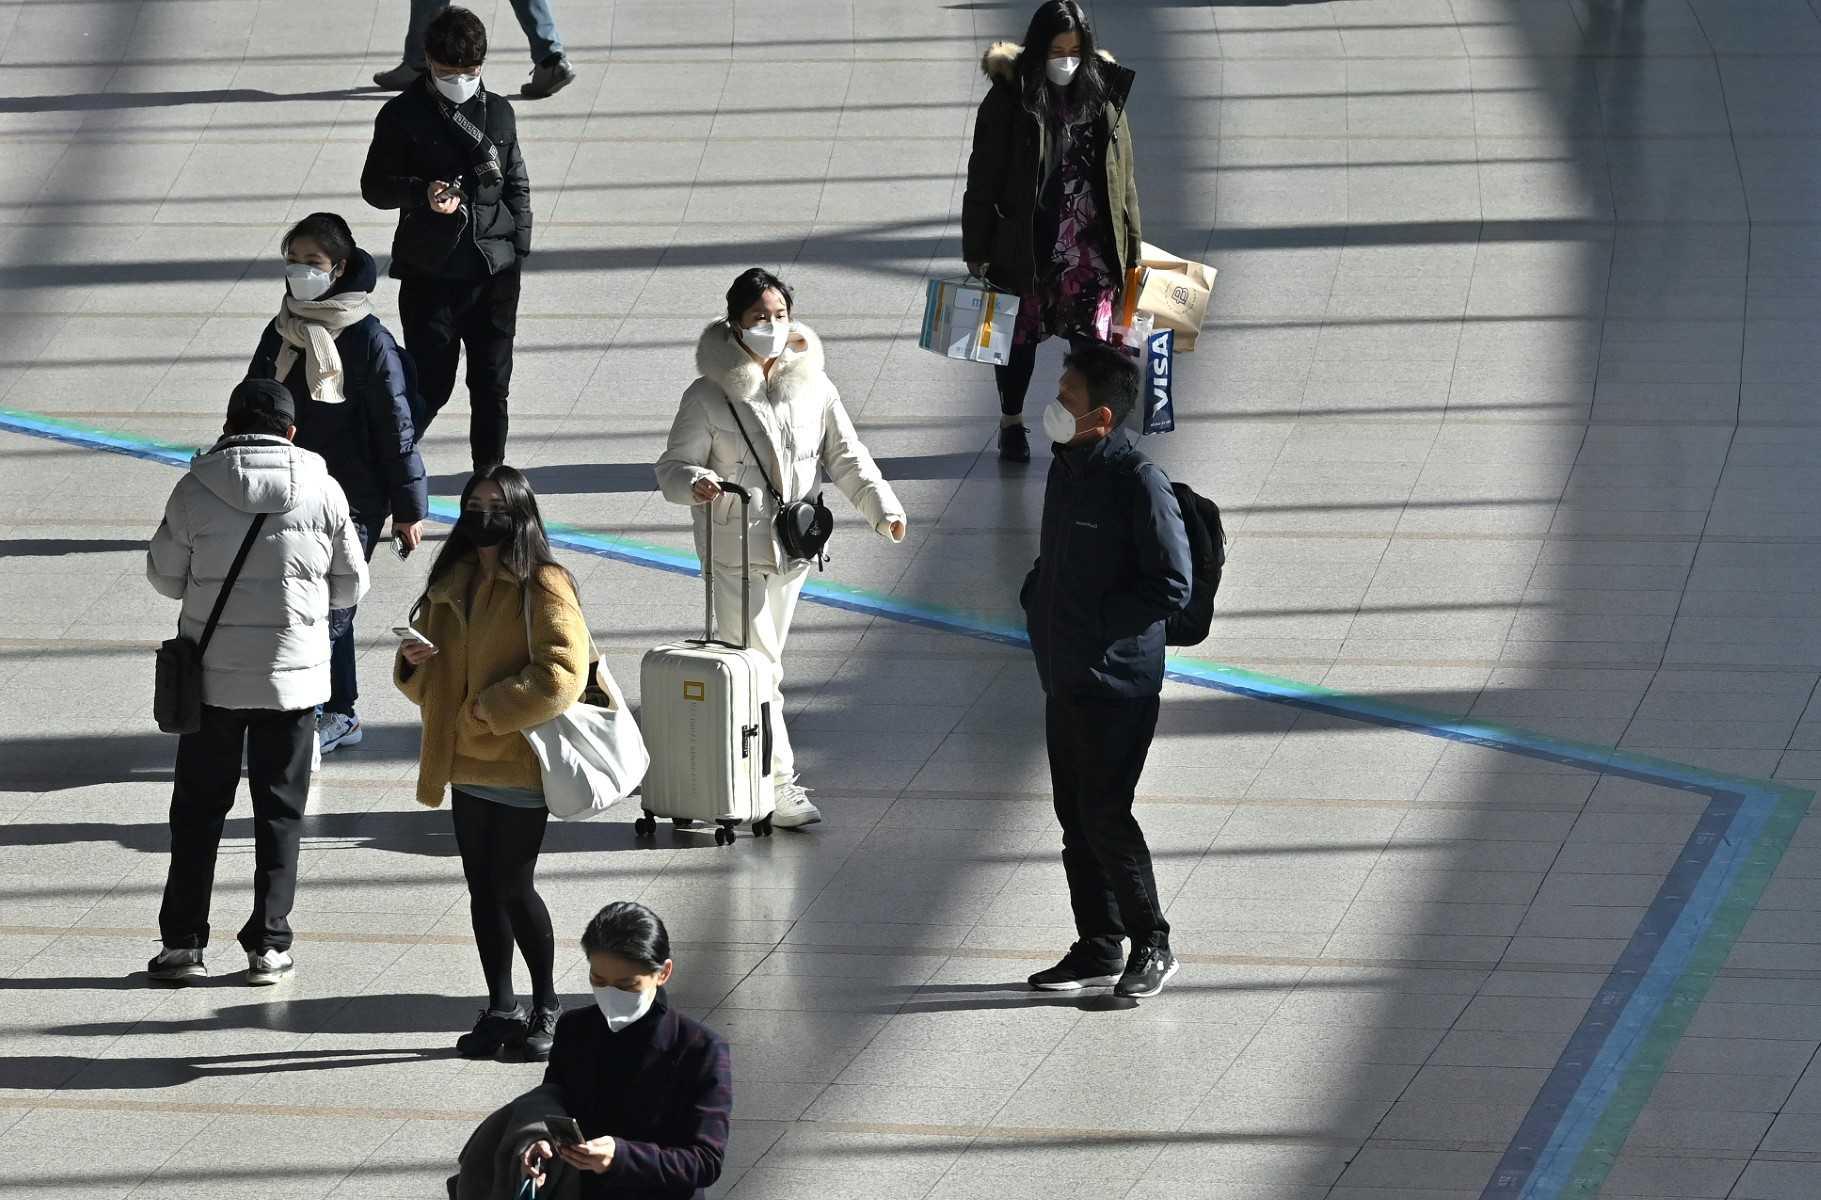 People wearing face masks walk through a railway station in Seoul on Feb 18. Photo: AFP